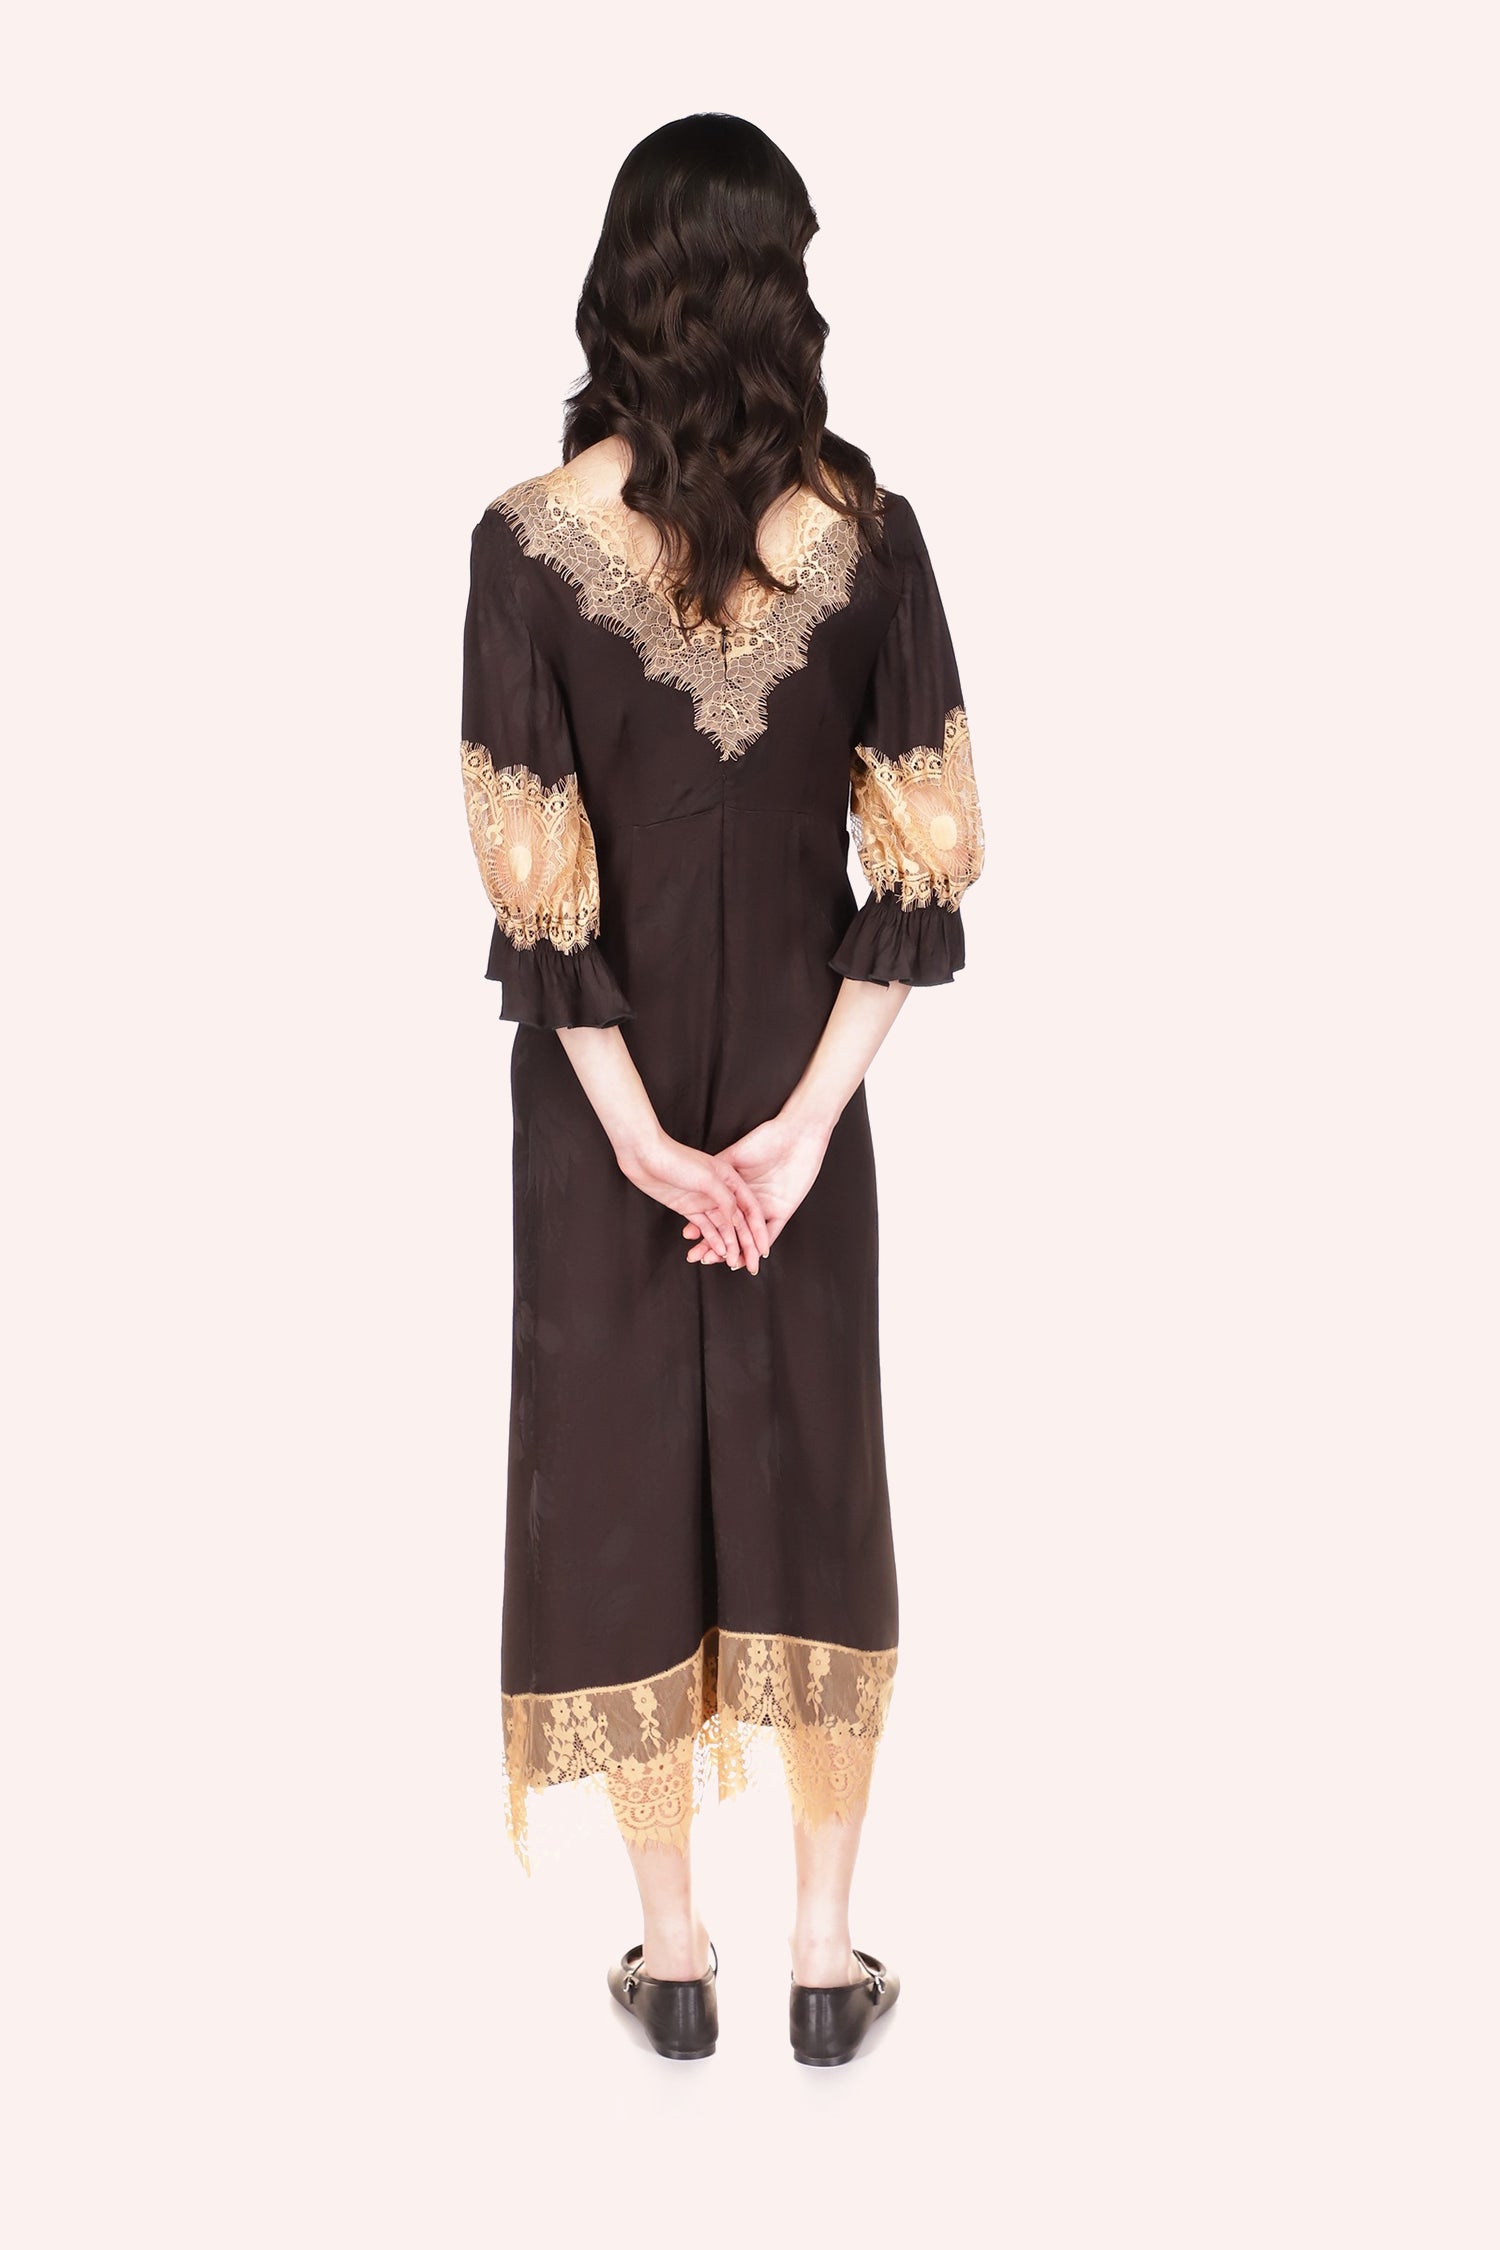 Dress Black, V-cut collar back, beige lace at all hems and mid-arm, ruffle like effect ends of sleeves